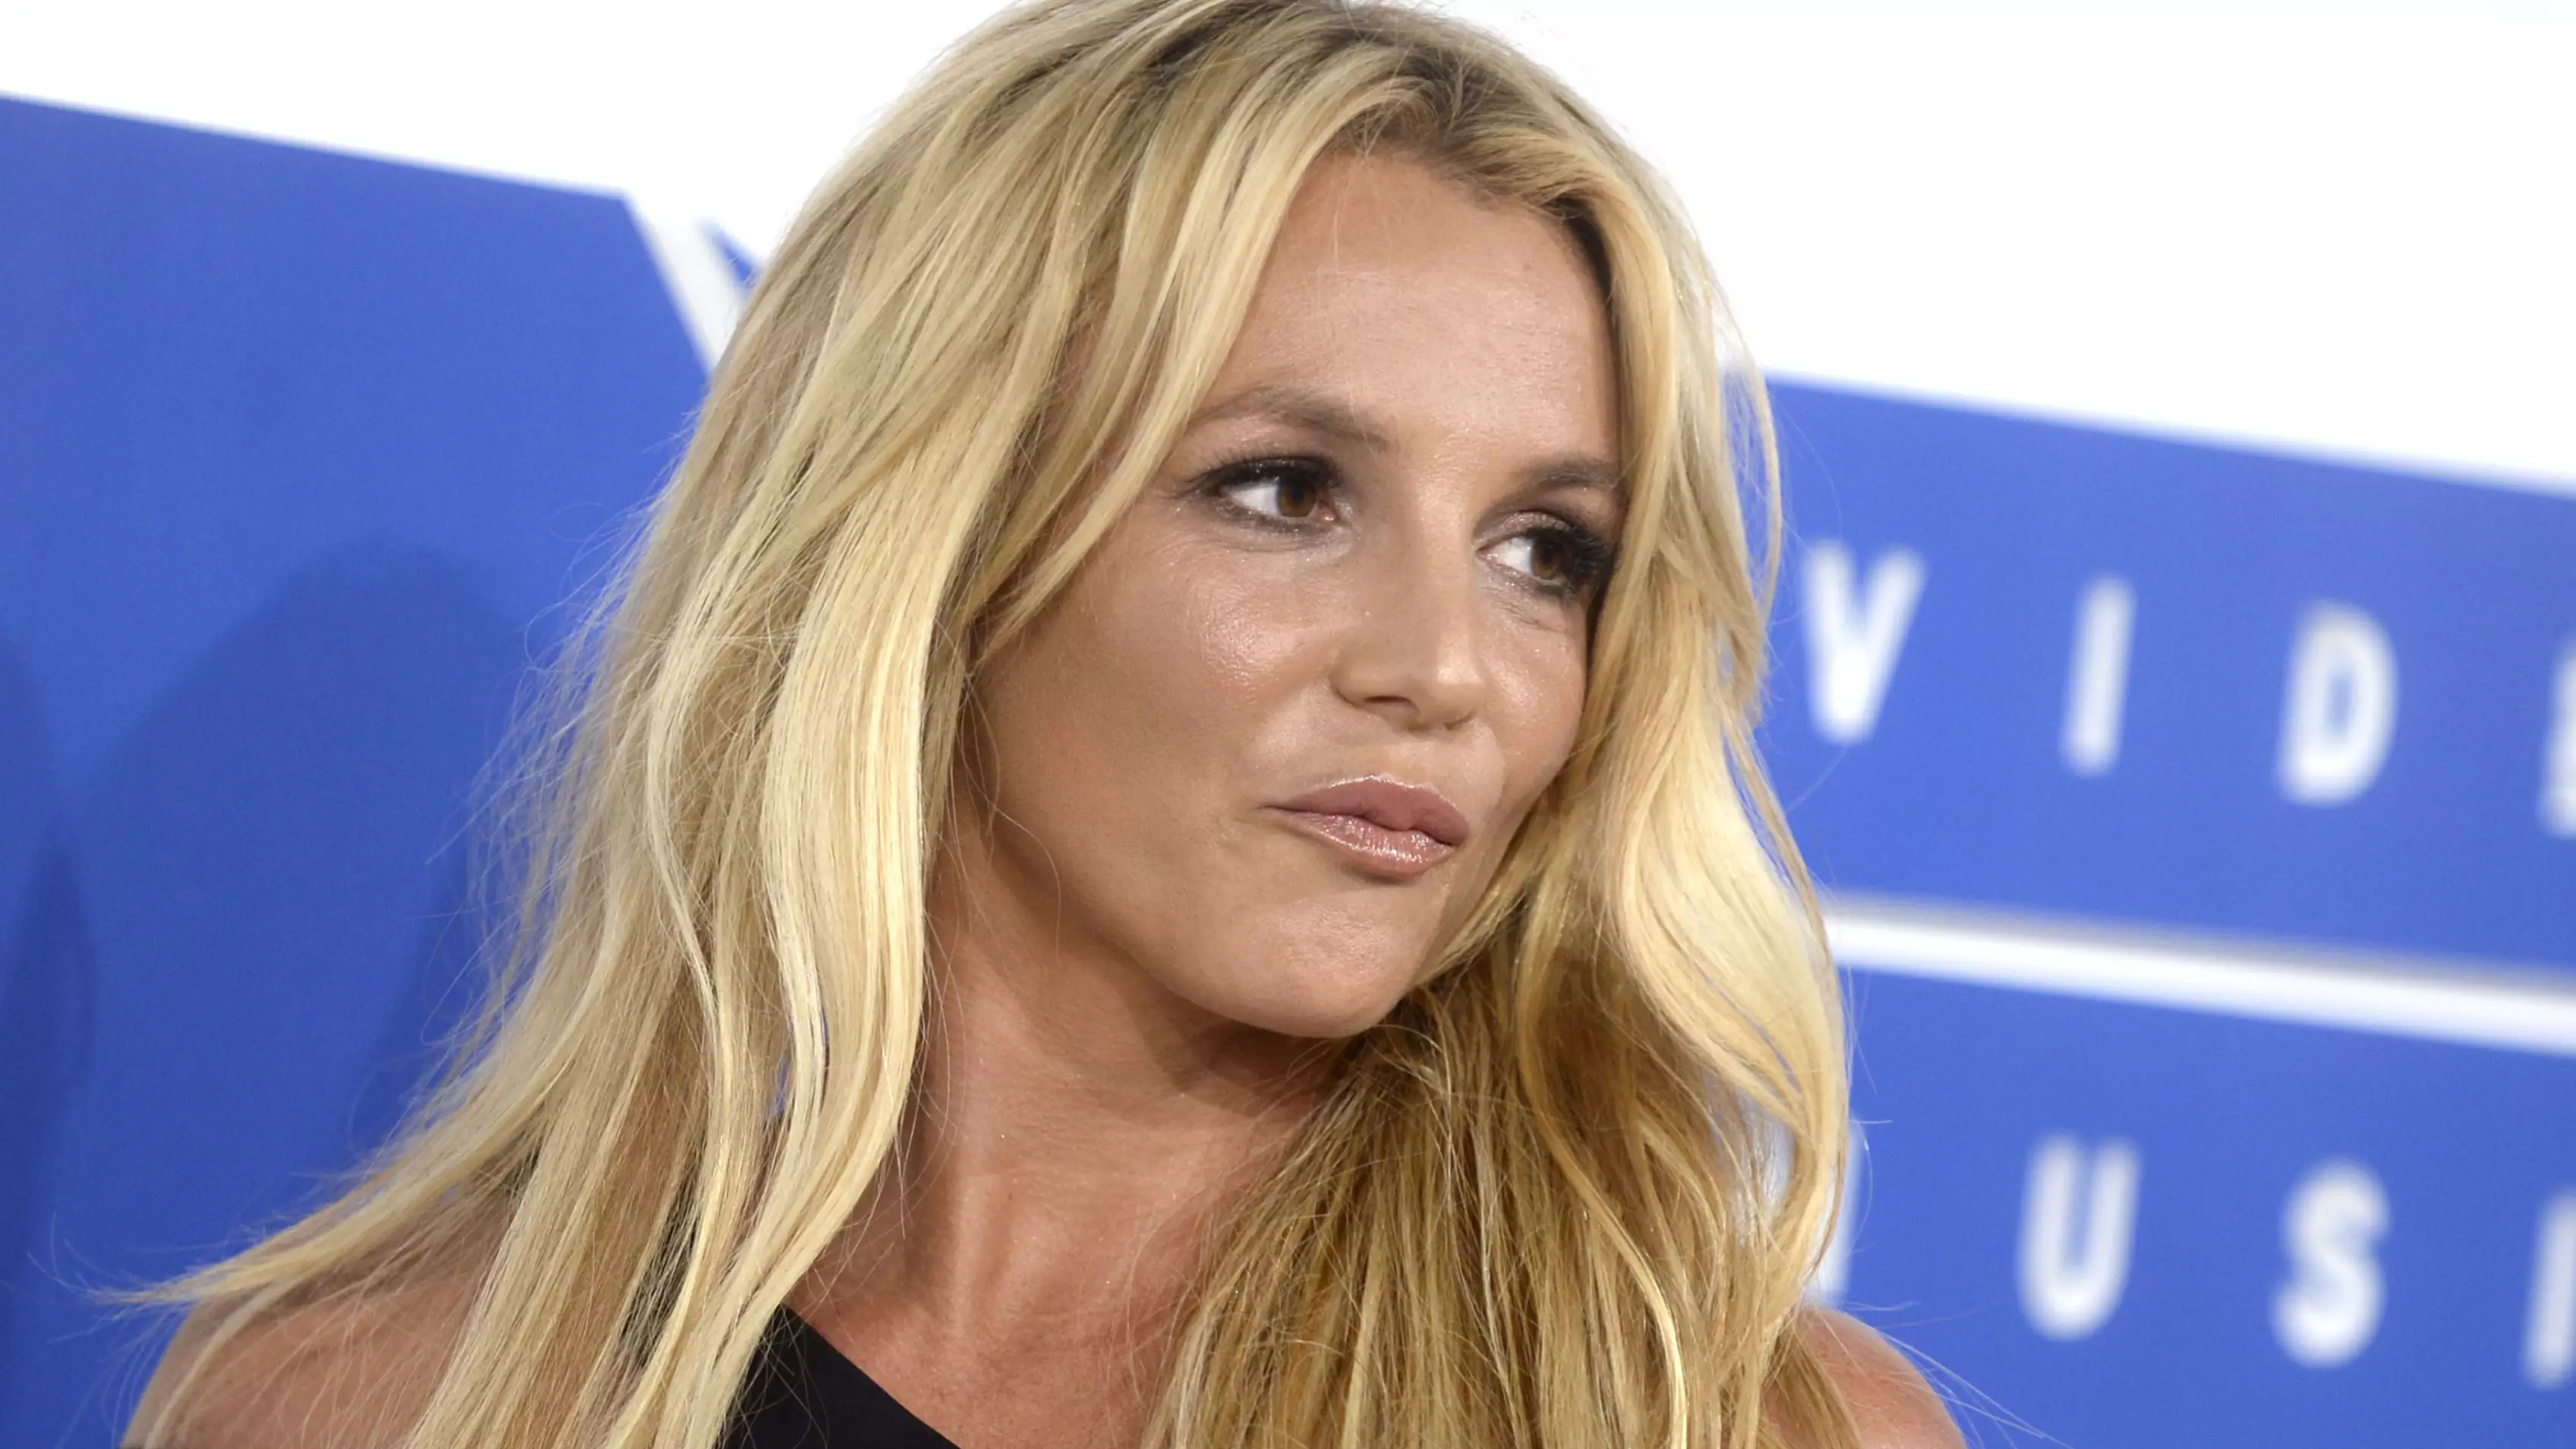 Britney's hearing comes after her bombshell statement last month